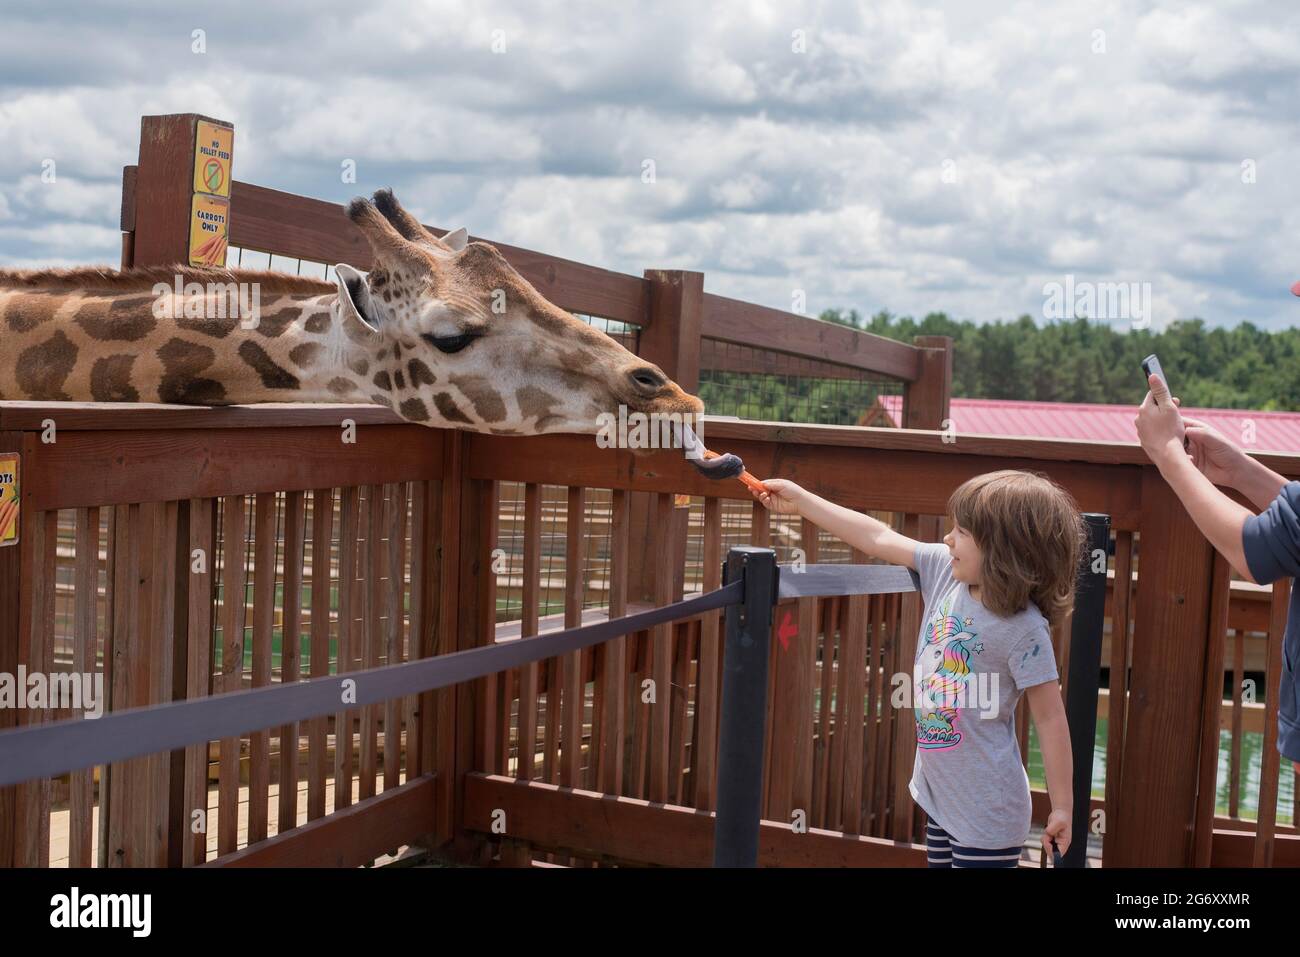 A six-year-old child feeds an African reticulated giraffe at the Animal Adventure Park, Harpursville, NY. Stock Photo